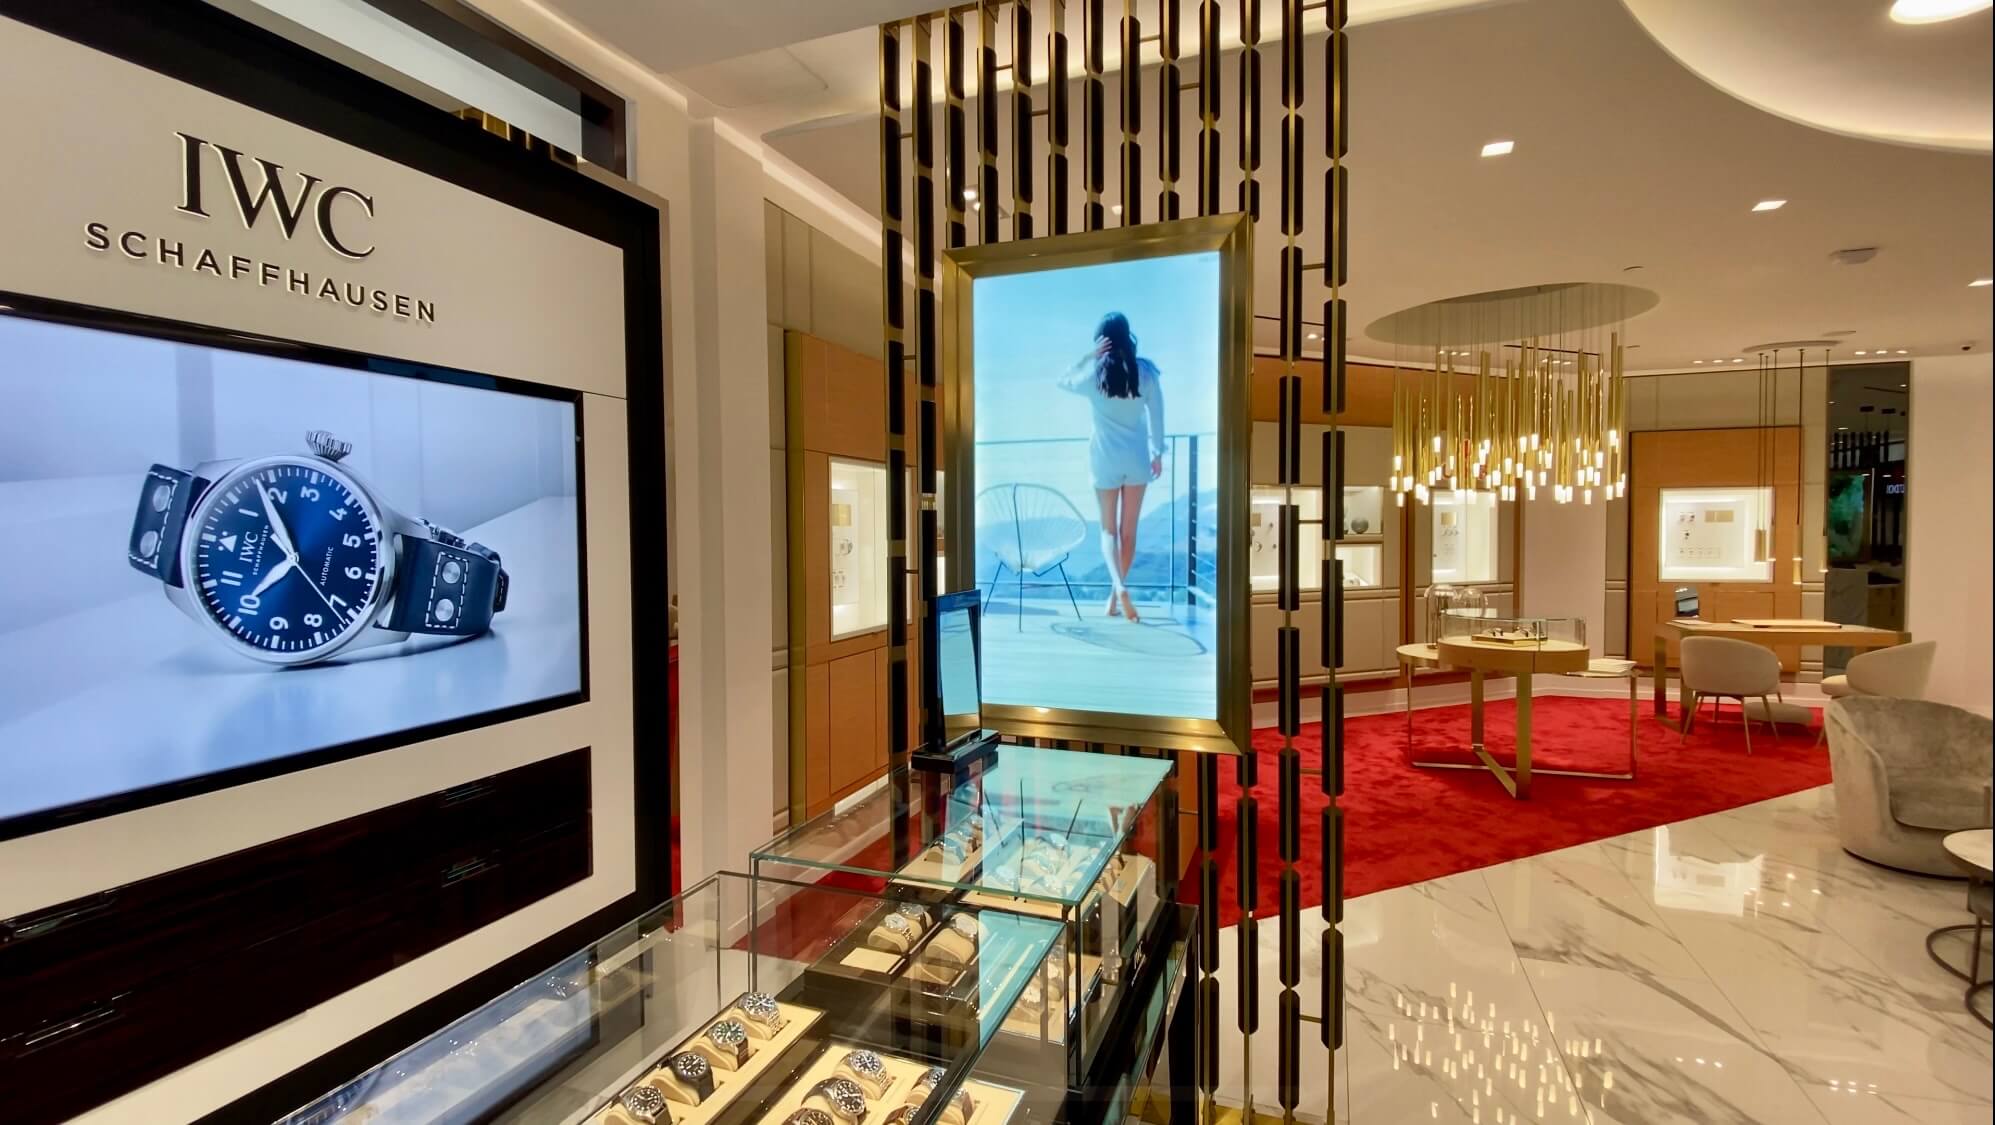 Best Practices for Digital Signage in Retail